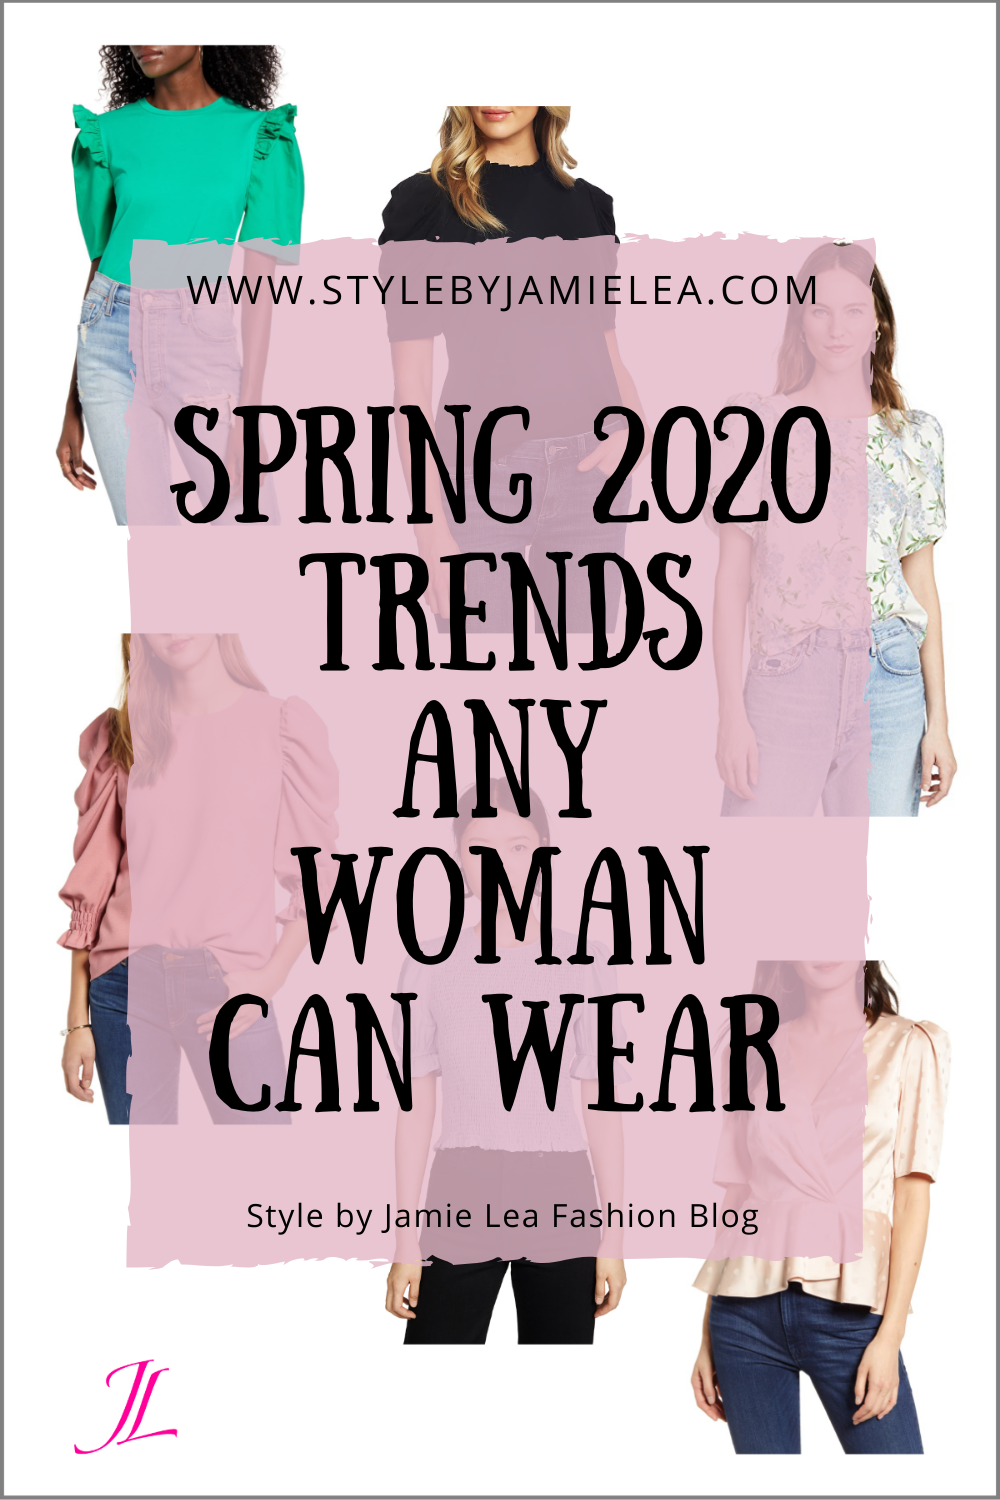 Spring 2020 Trends Any Woman Can Wear – Style by Jamie Lea